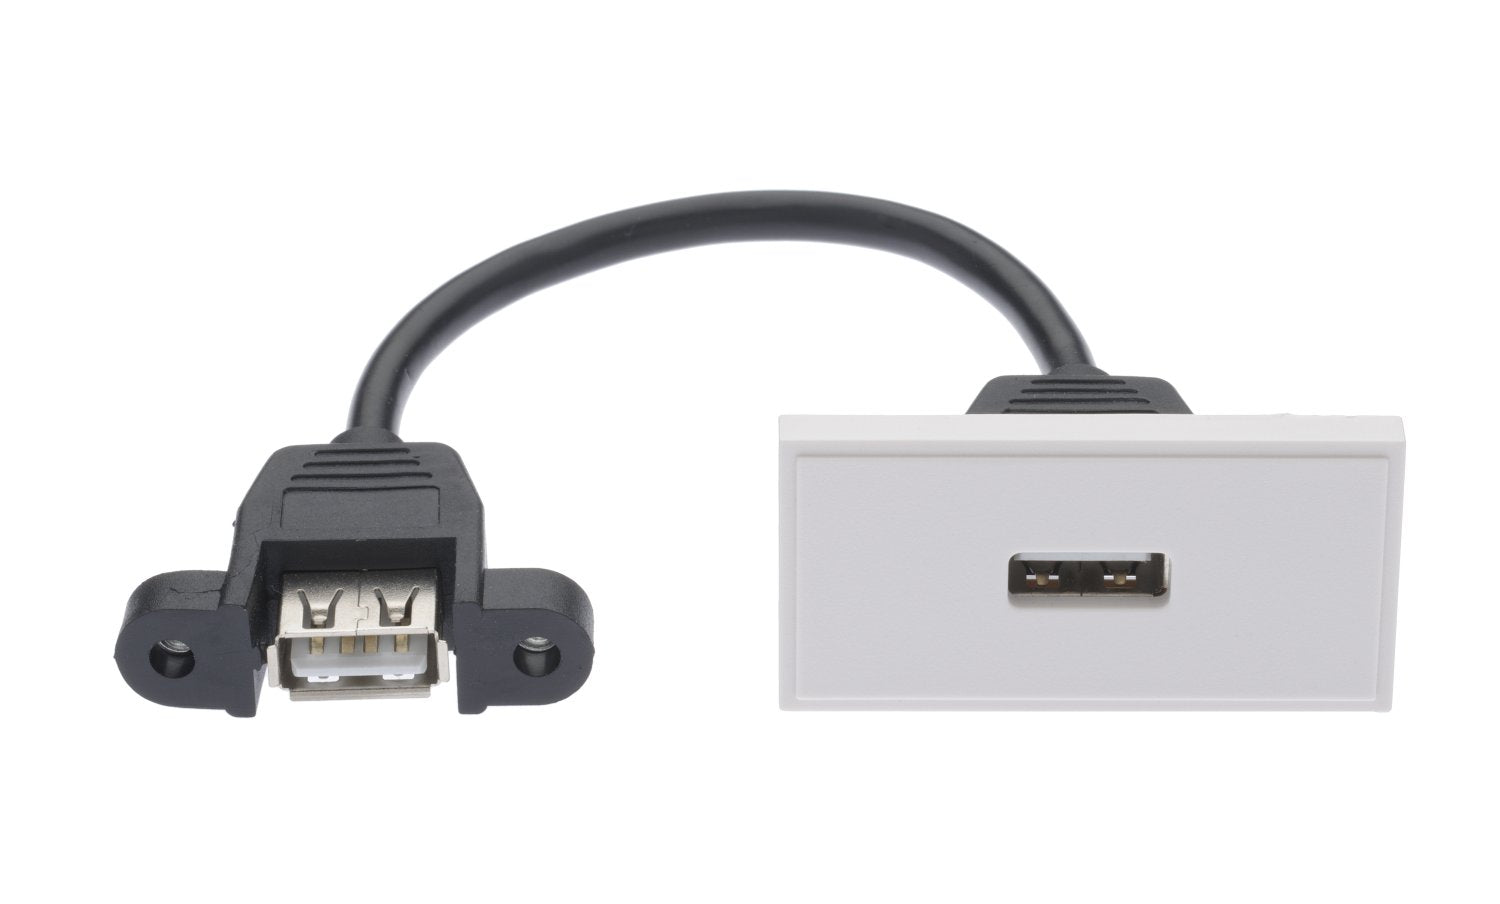 USB Type A Outlet